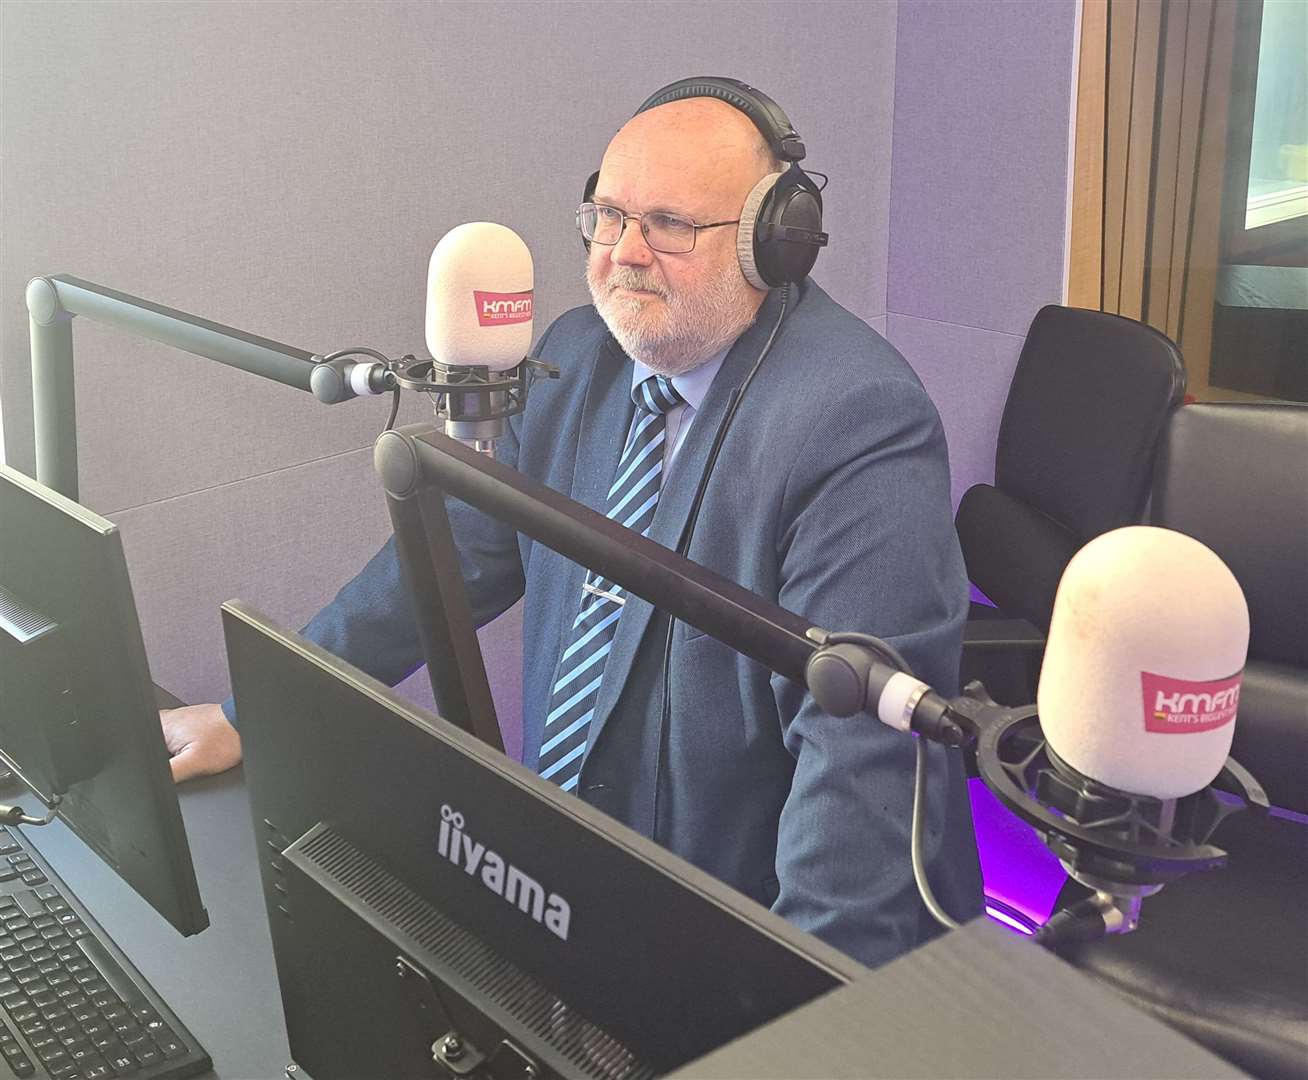 Dartford council leader Cllr Jeremy Kite appeared on the Kent Politics Podcast